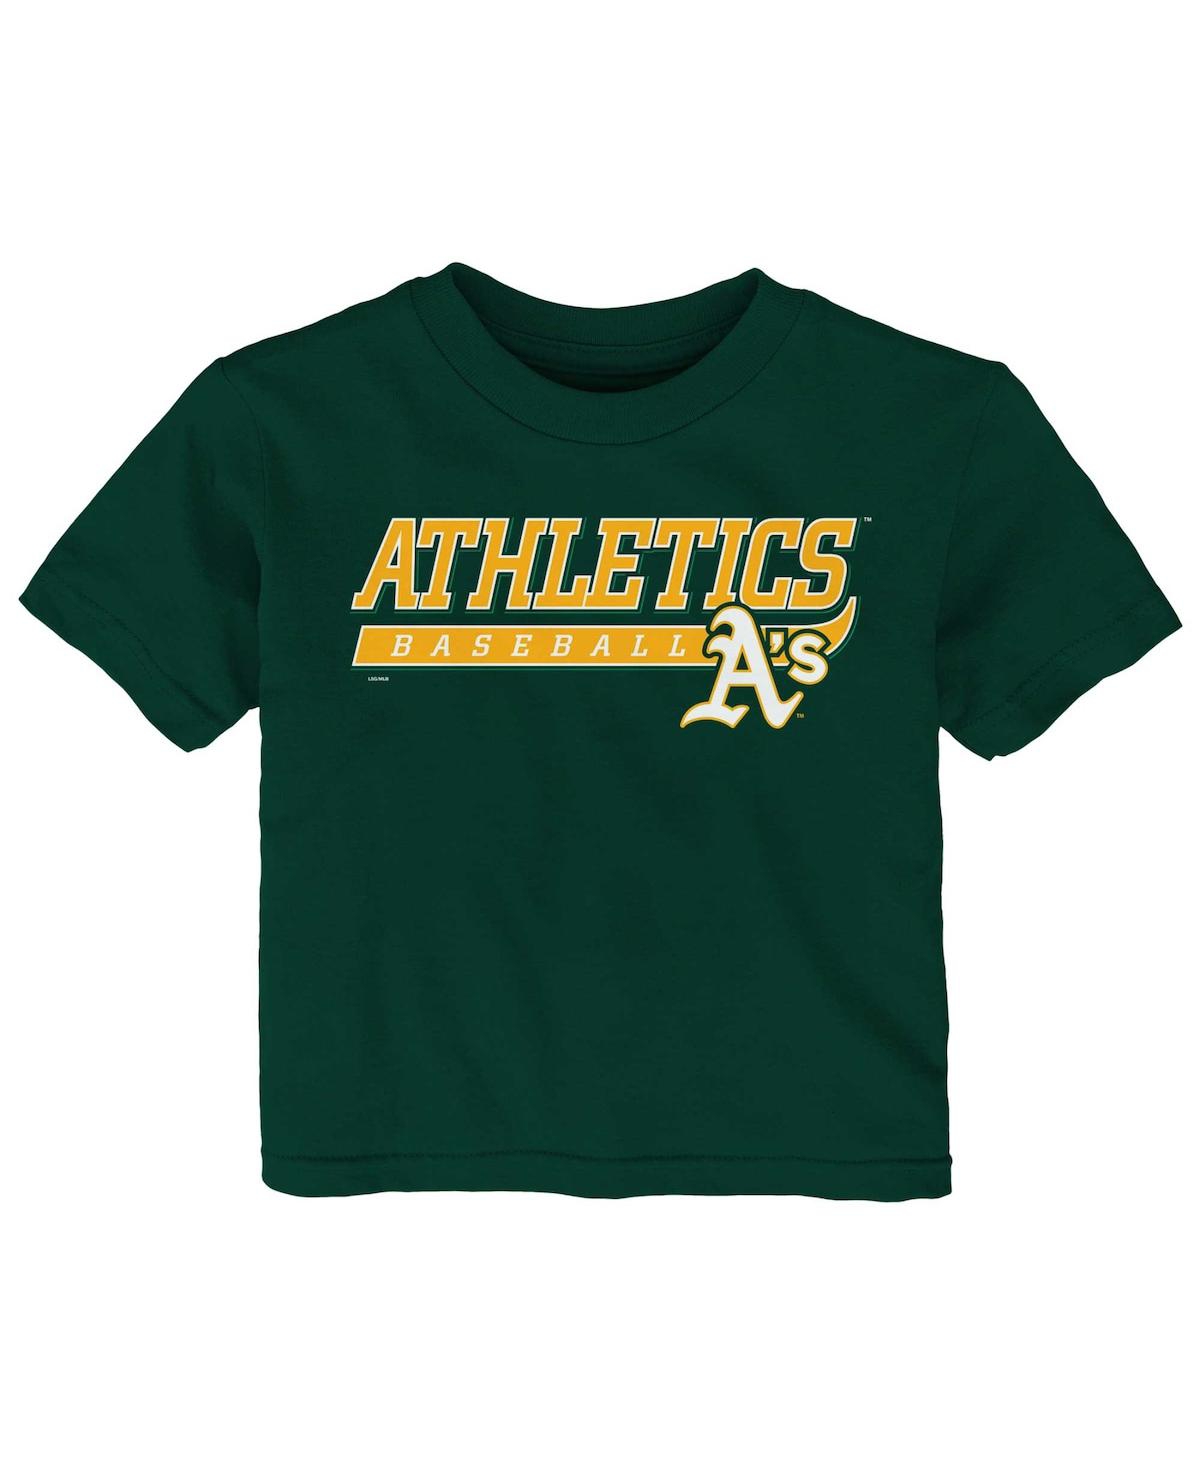 Kids Discounted Oakland Athletics Gear, Cheap Youth A's Apparel